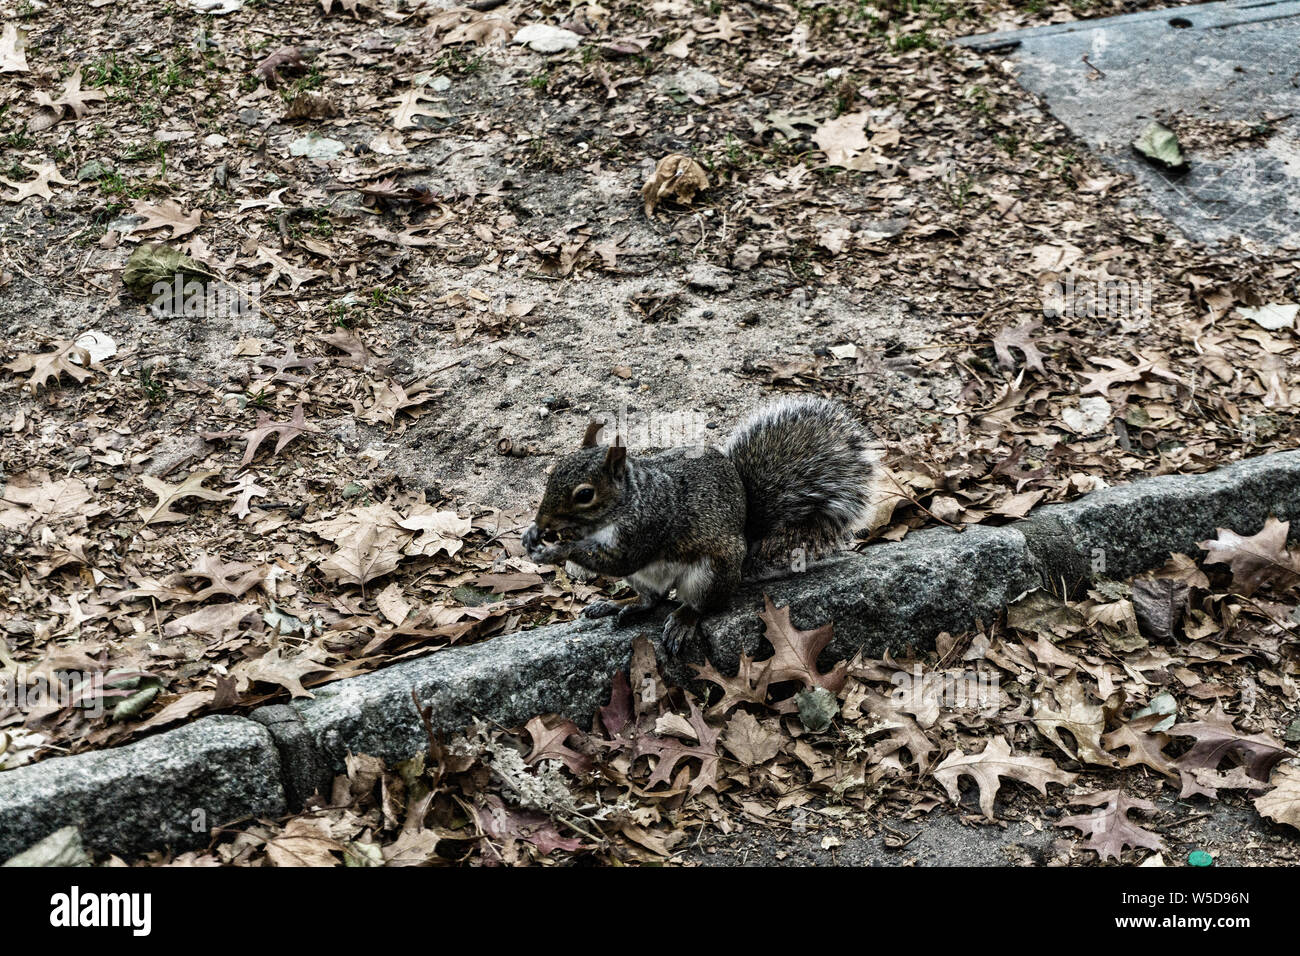 Squirrels at Central Park. Stock Photo